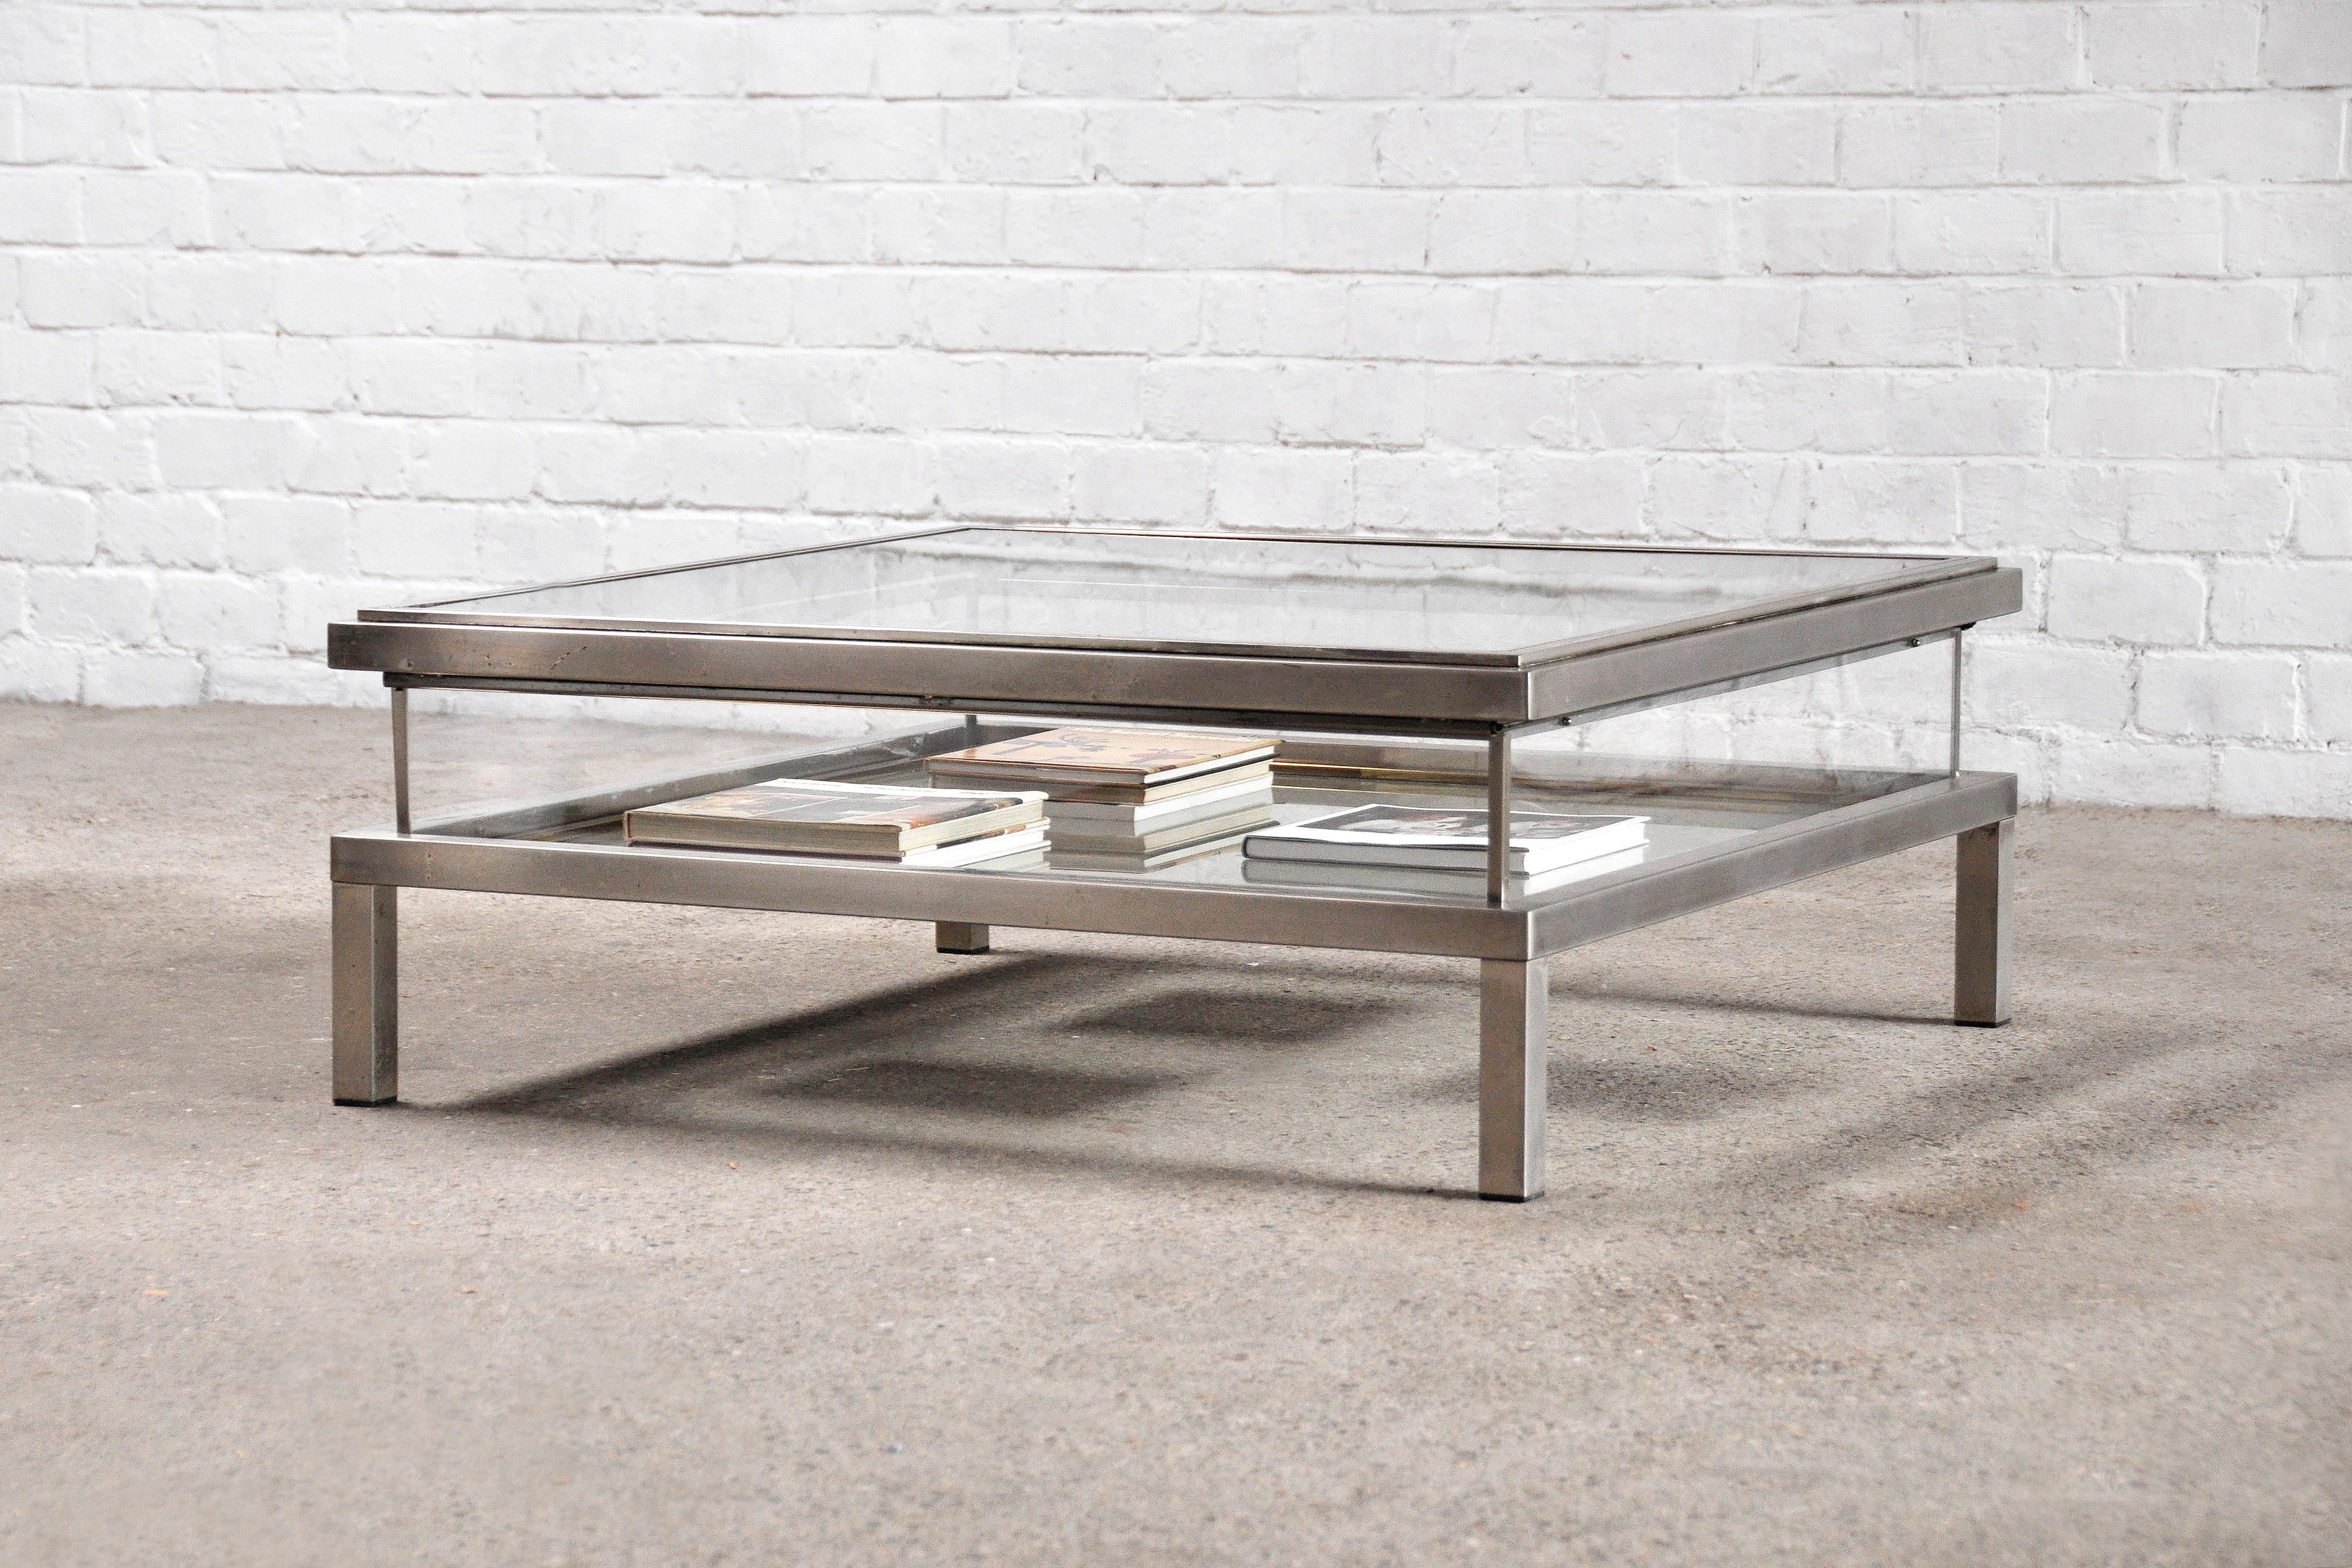 Large square glass table with sliding top by Maison Jansen. The coffee table has the ability to slide open which allows one to store magazines or other objects. The framed is made out of chromed steel with brass plated finishes.

The table is in